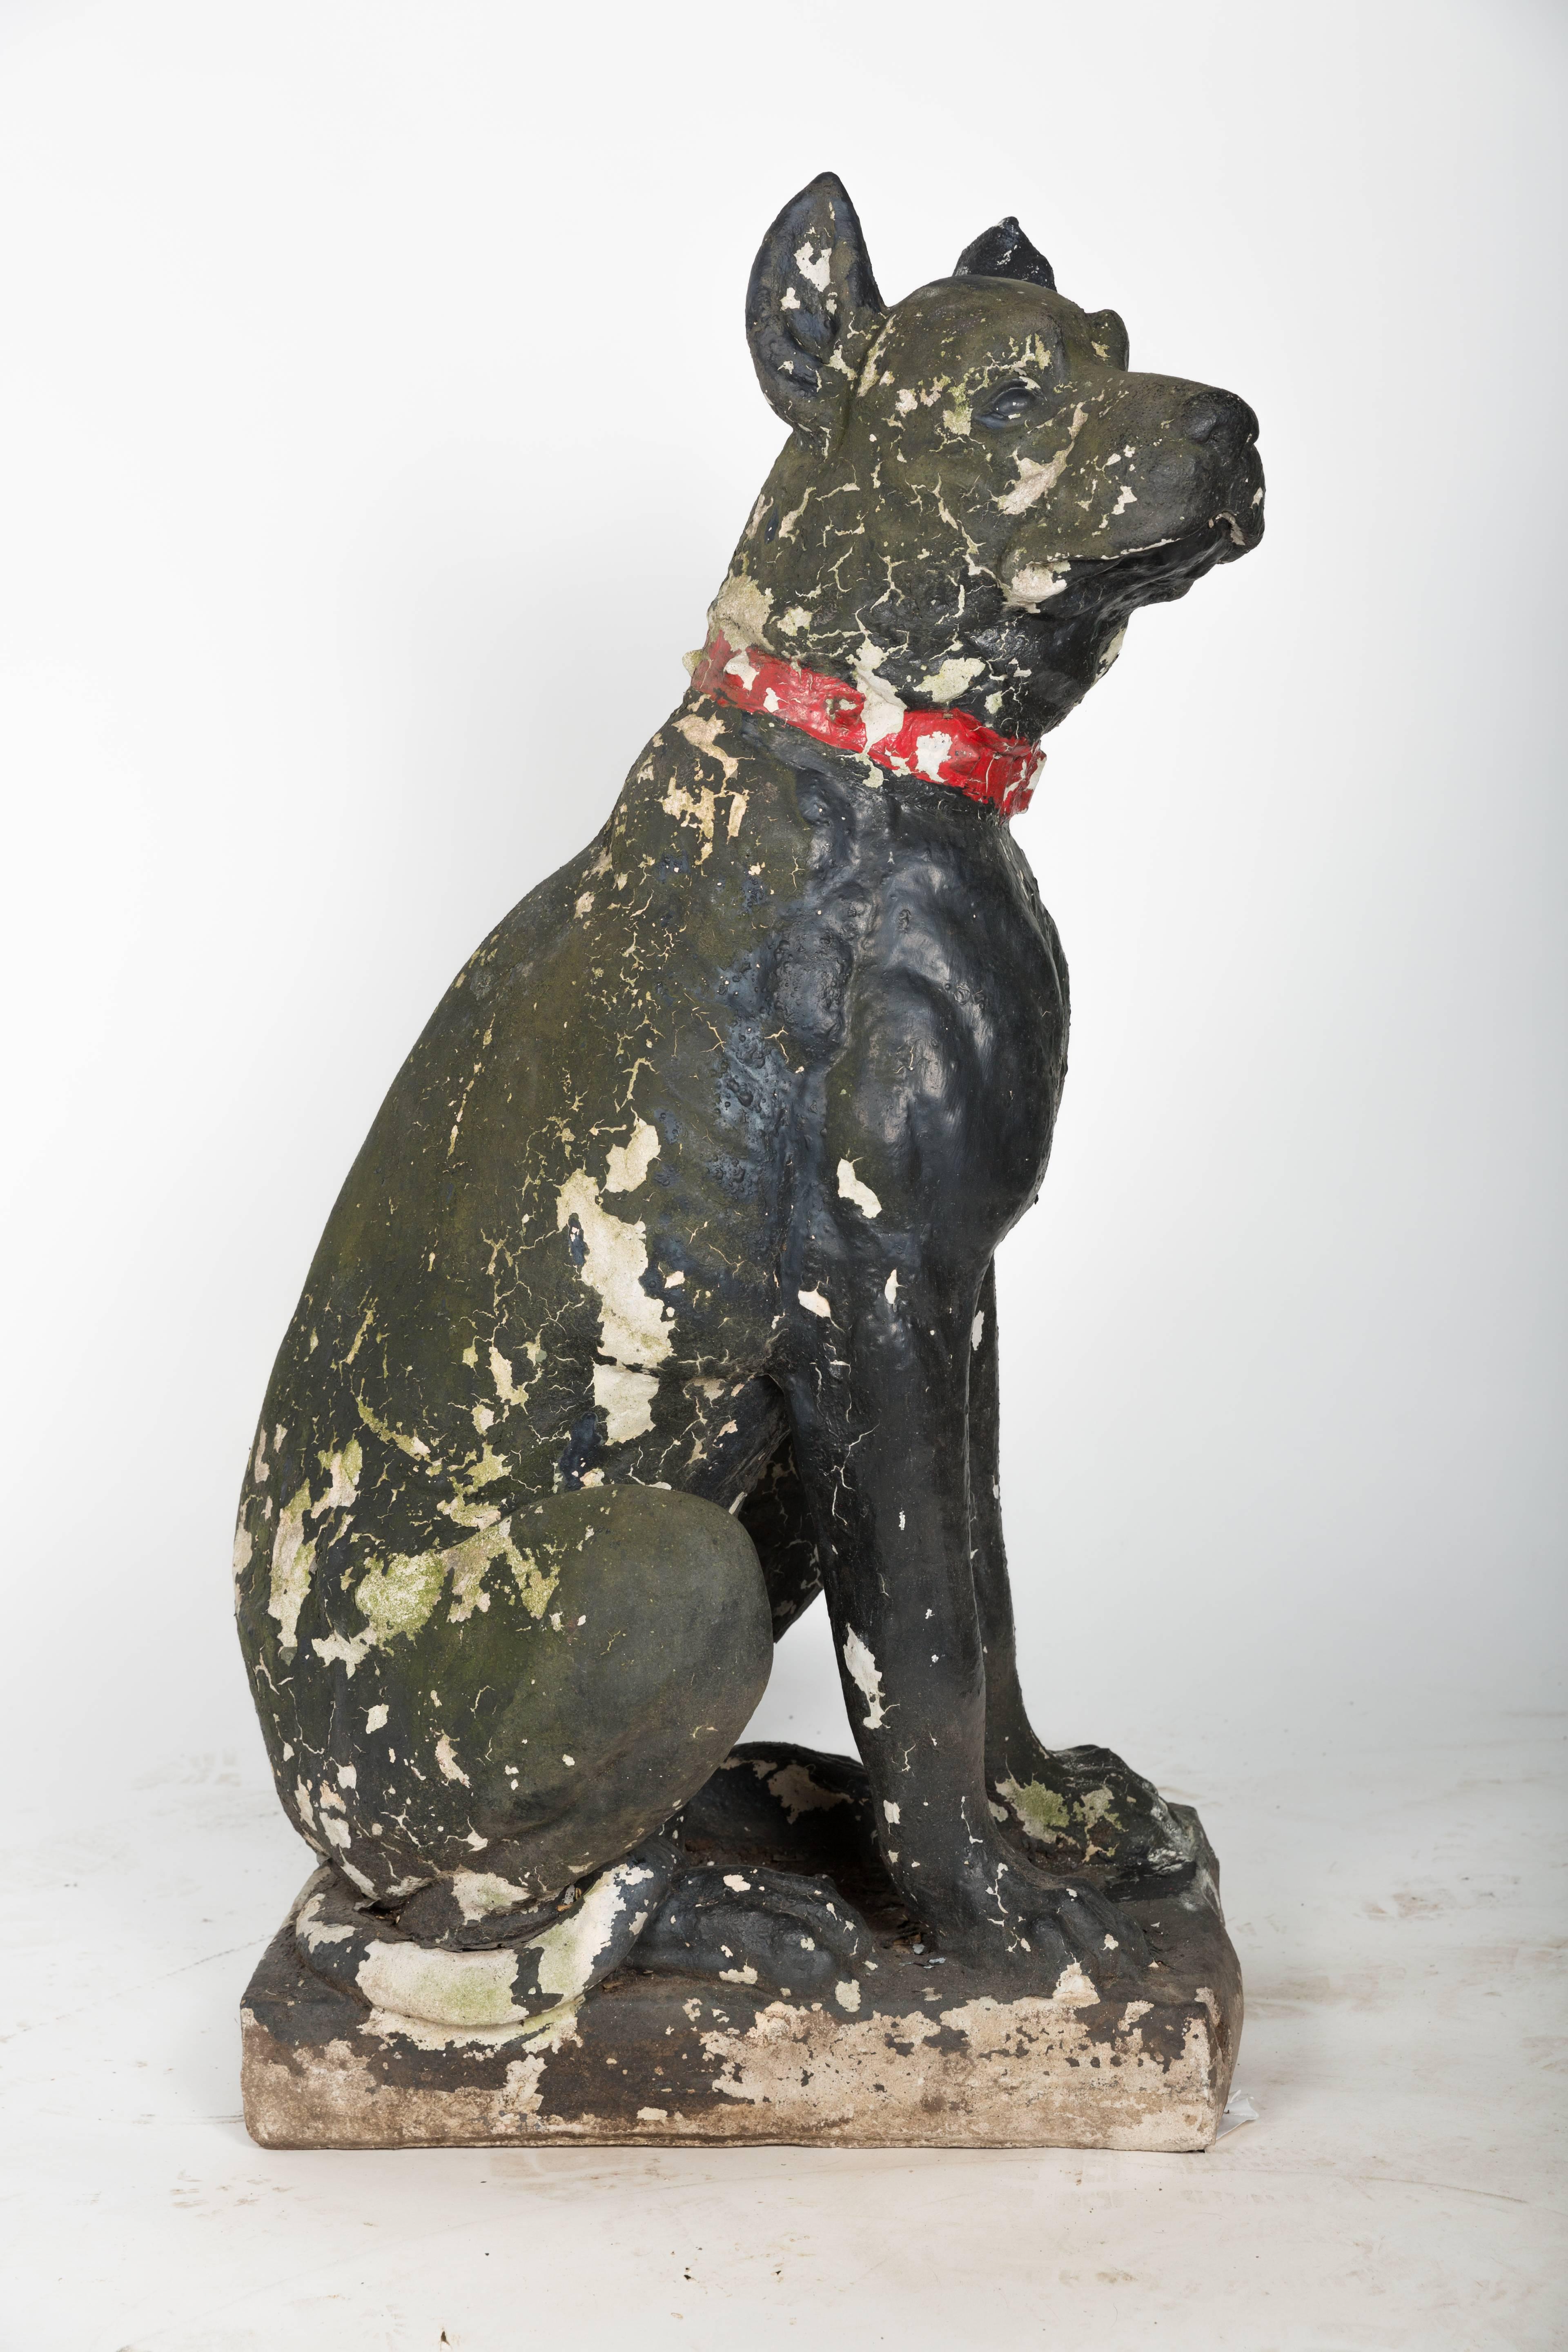 Bought out of a Greenwhich, Connecticut estate, where this concrete Great Dane stood guard for the past 60 years. He's Big!
Great unique piece.